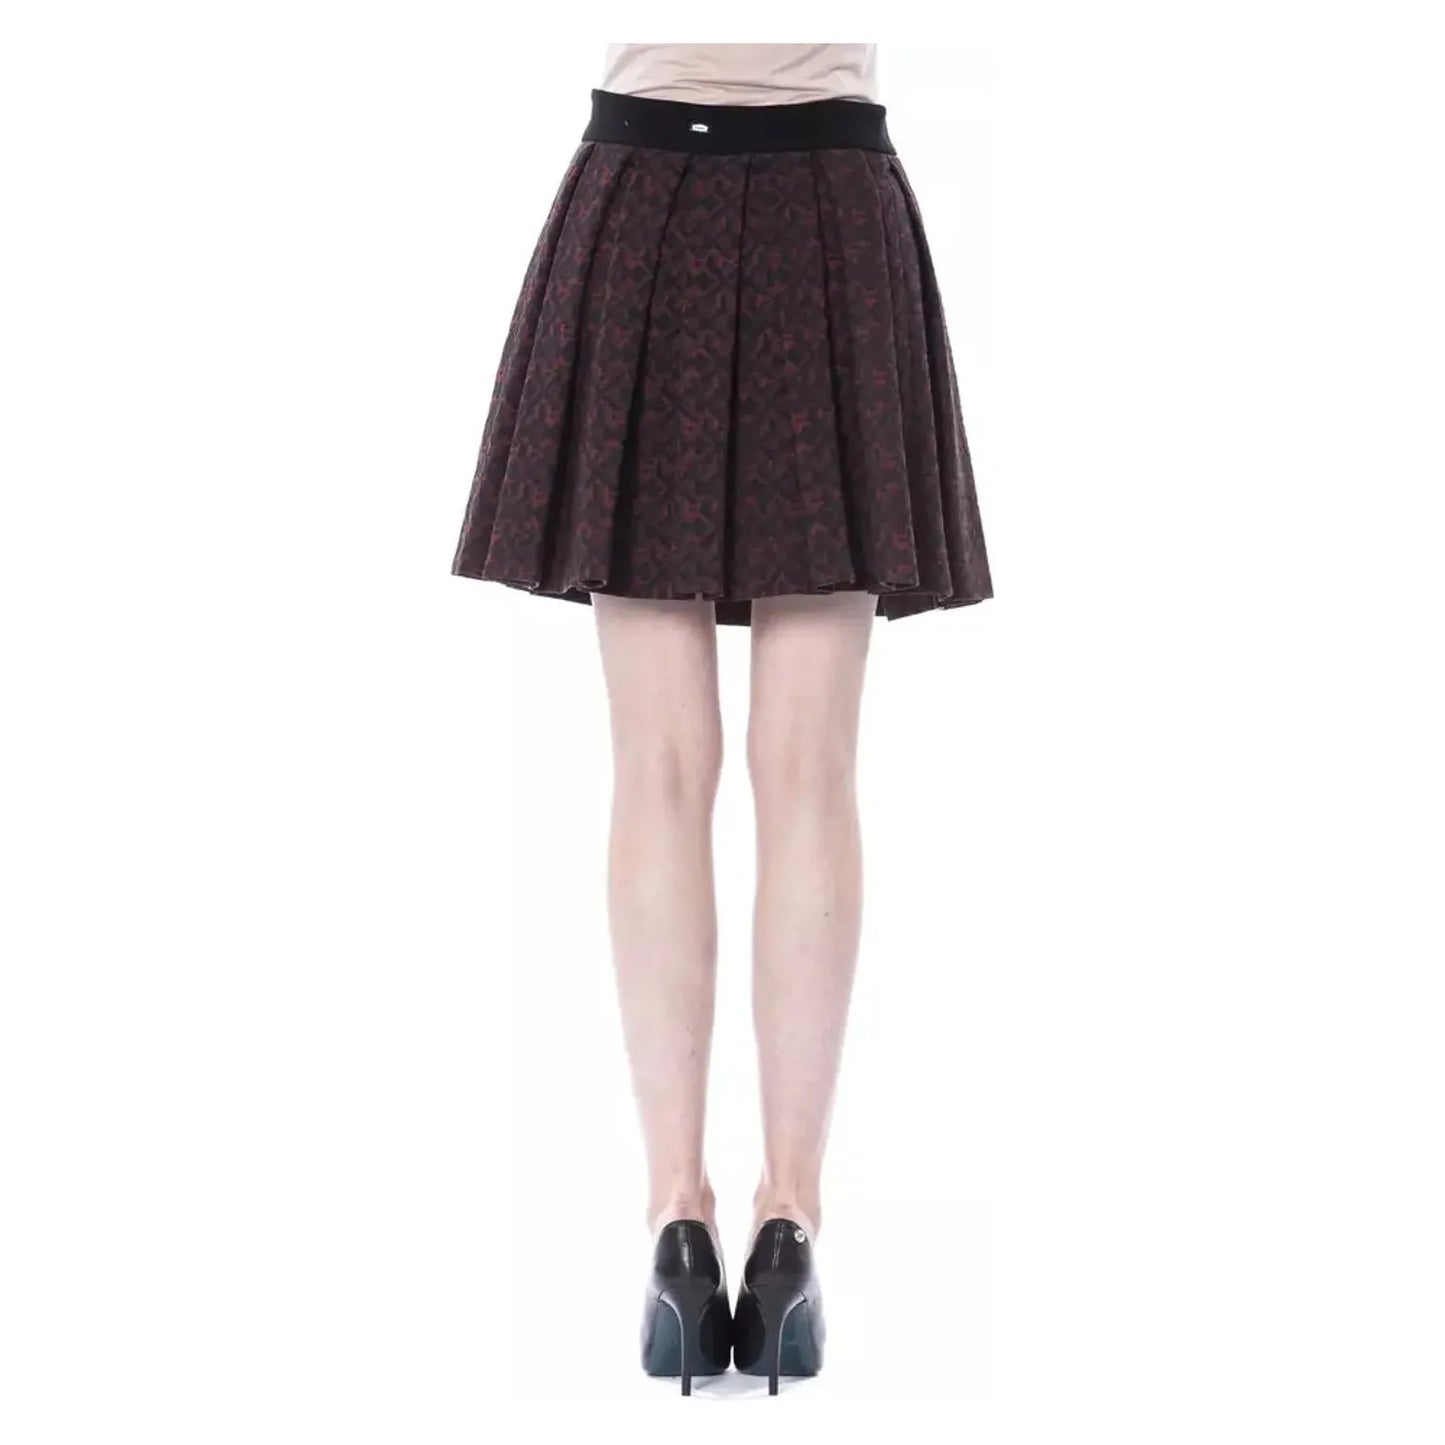 BYBLOS Chic Tulip Brown Skirt - Cotton Blend Elegance brown-cotton-skirt WOMAN SKIRTS stock_product_image_17679_1078851554-15-a3bbc7b0-a8d.webp